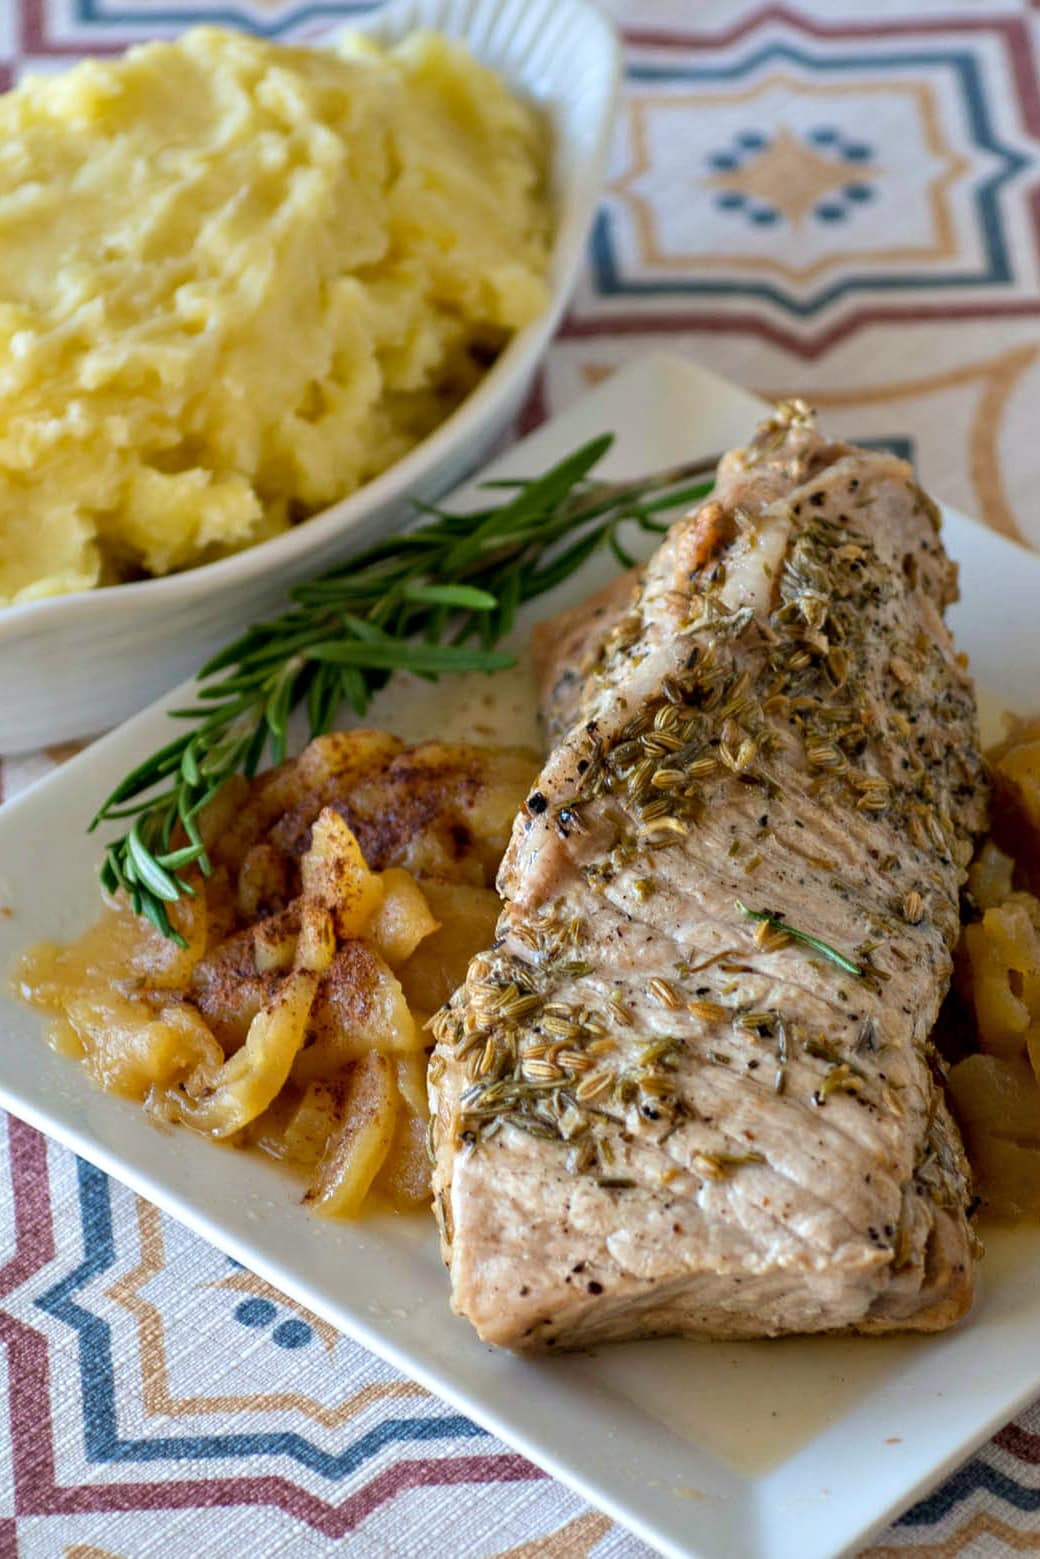 Instant Pot Pork Loin Recipes
 Instant Pot Pork Loin with Apples and Mashed Potatoes